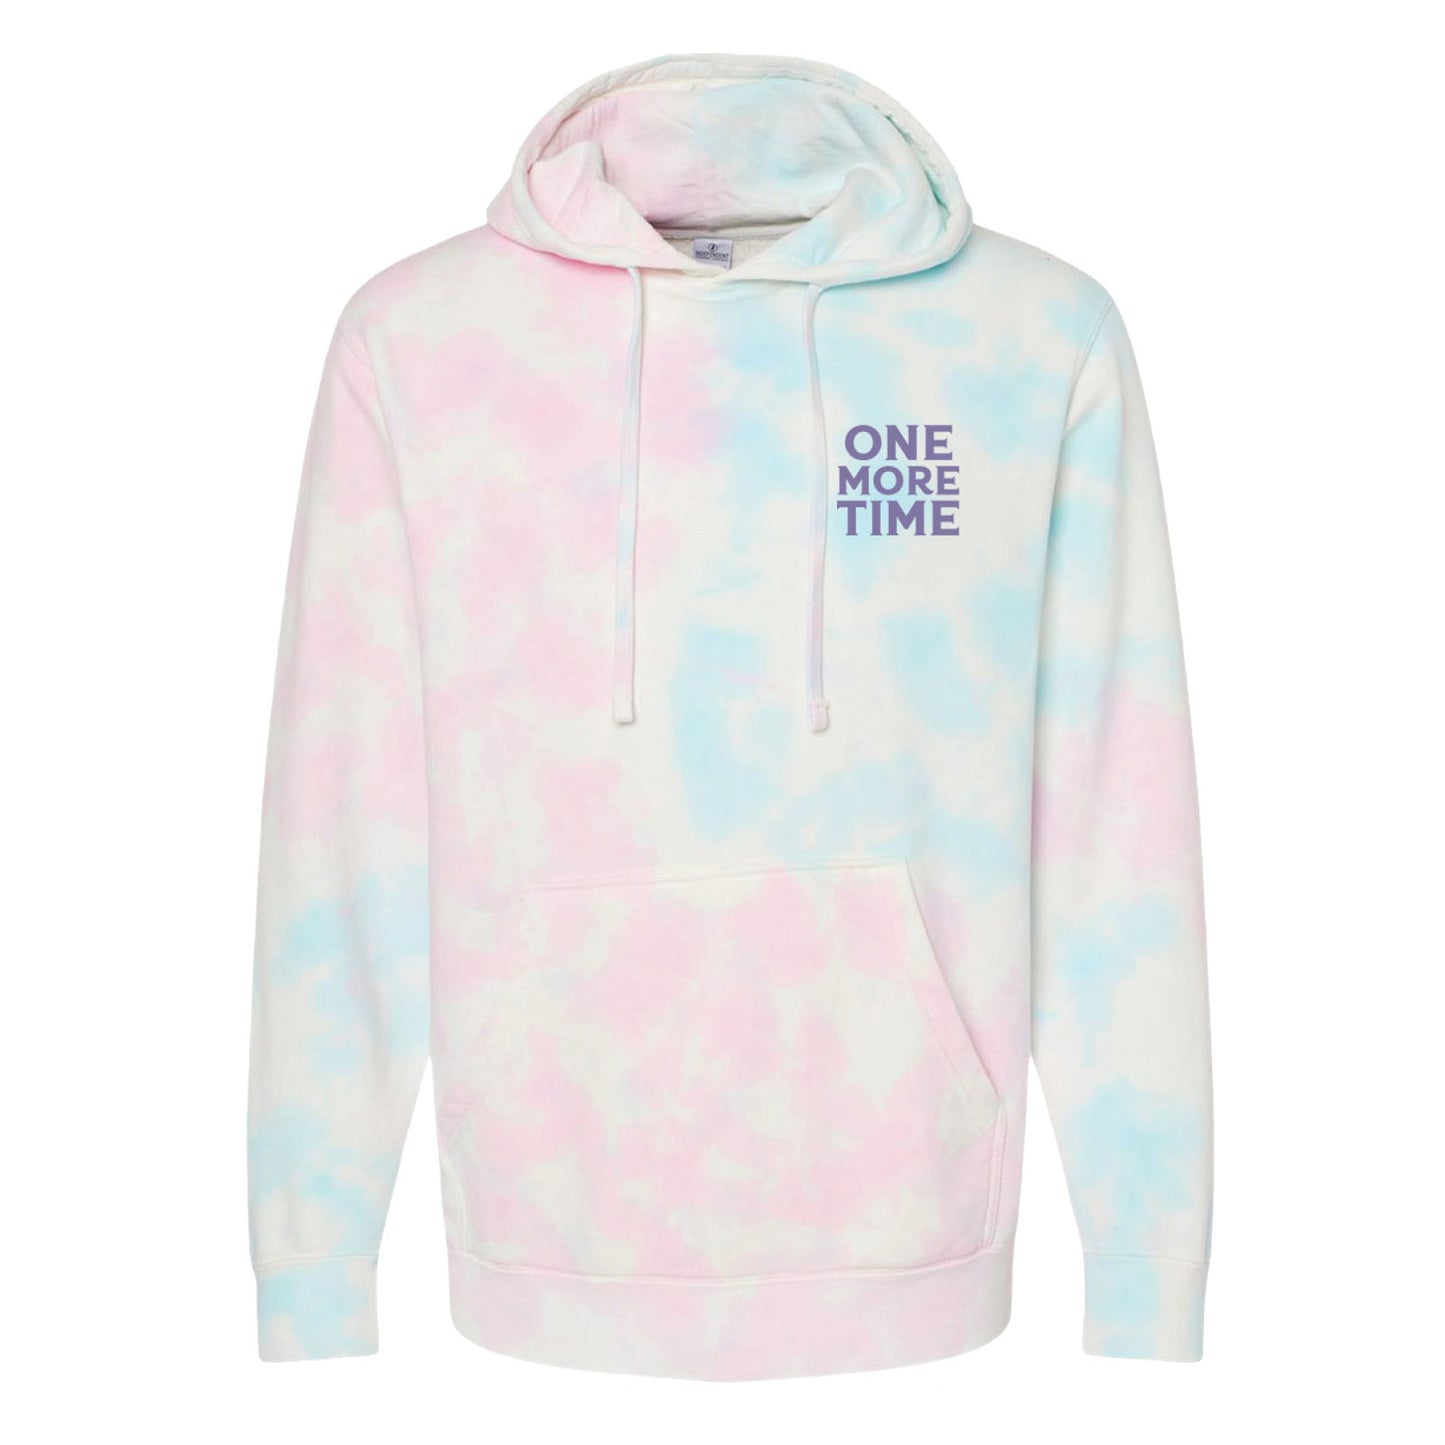 Once Upon A One More Time "It's Broadway Bitch" Tie Dye Pullover